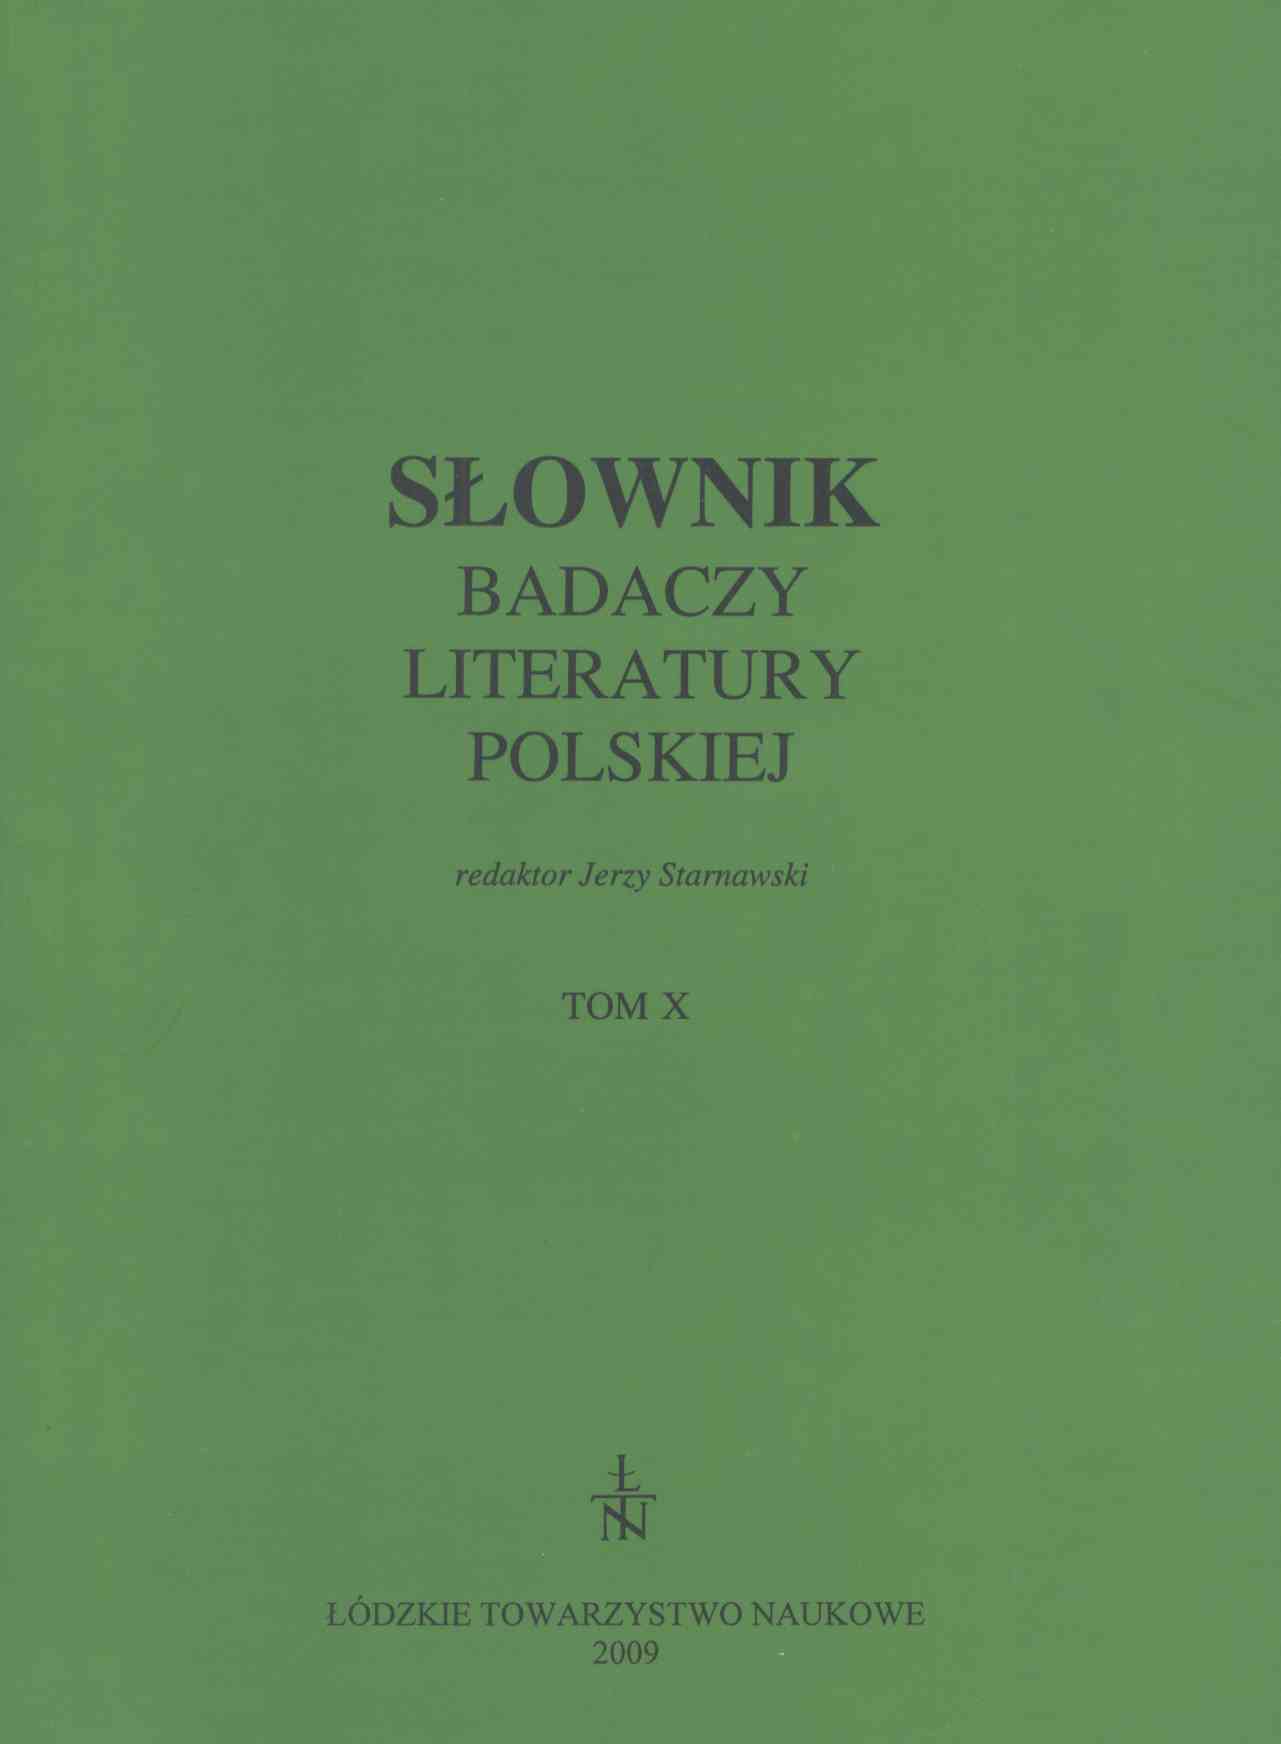 Dictionary of Polish literature scholars. Volume 10 Cover Image